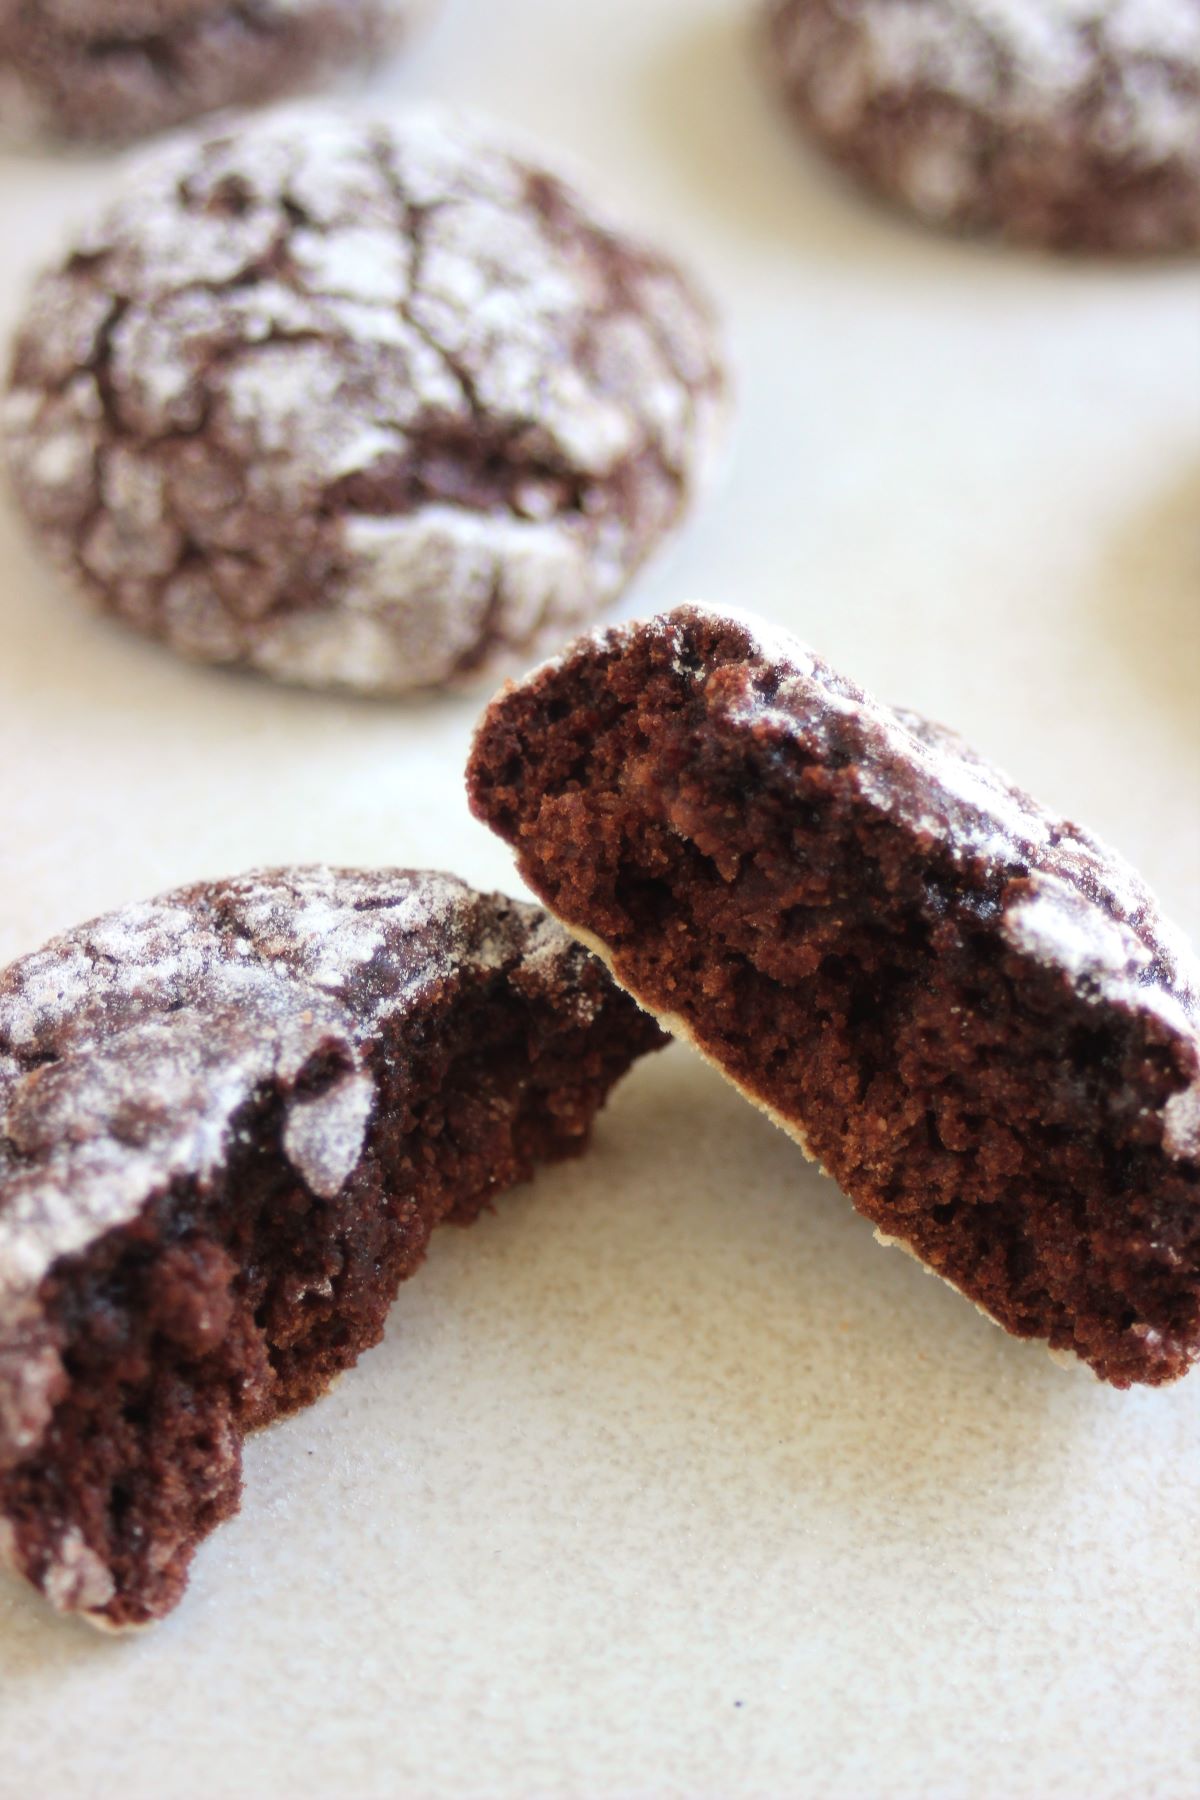 A chocolate crinkle cookie cut into two pieces on a white surface.